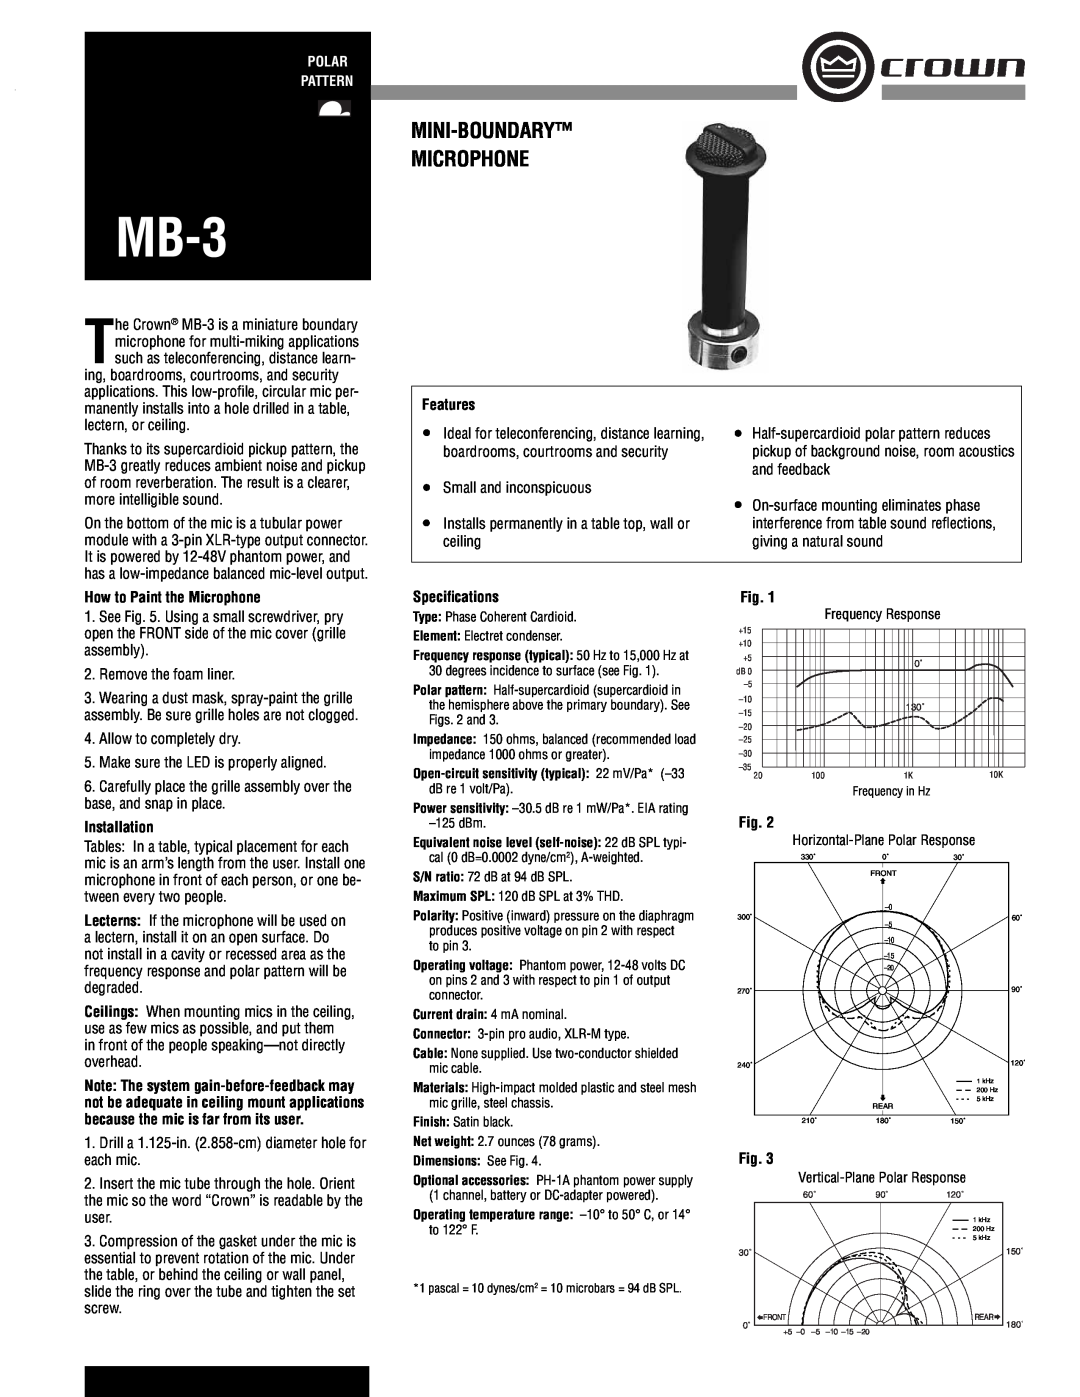 Crown Audio MB-3 specifications Features, How to Paint the Microphone, Speciﬁcations, Installation, Polar Pattern 